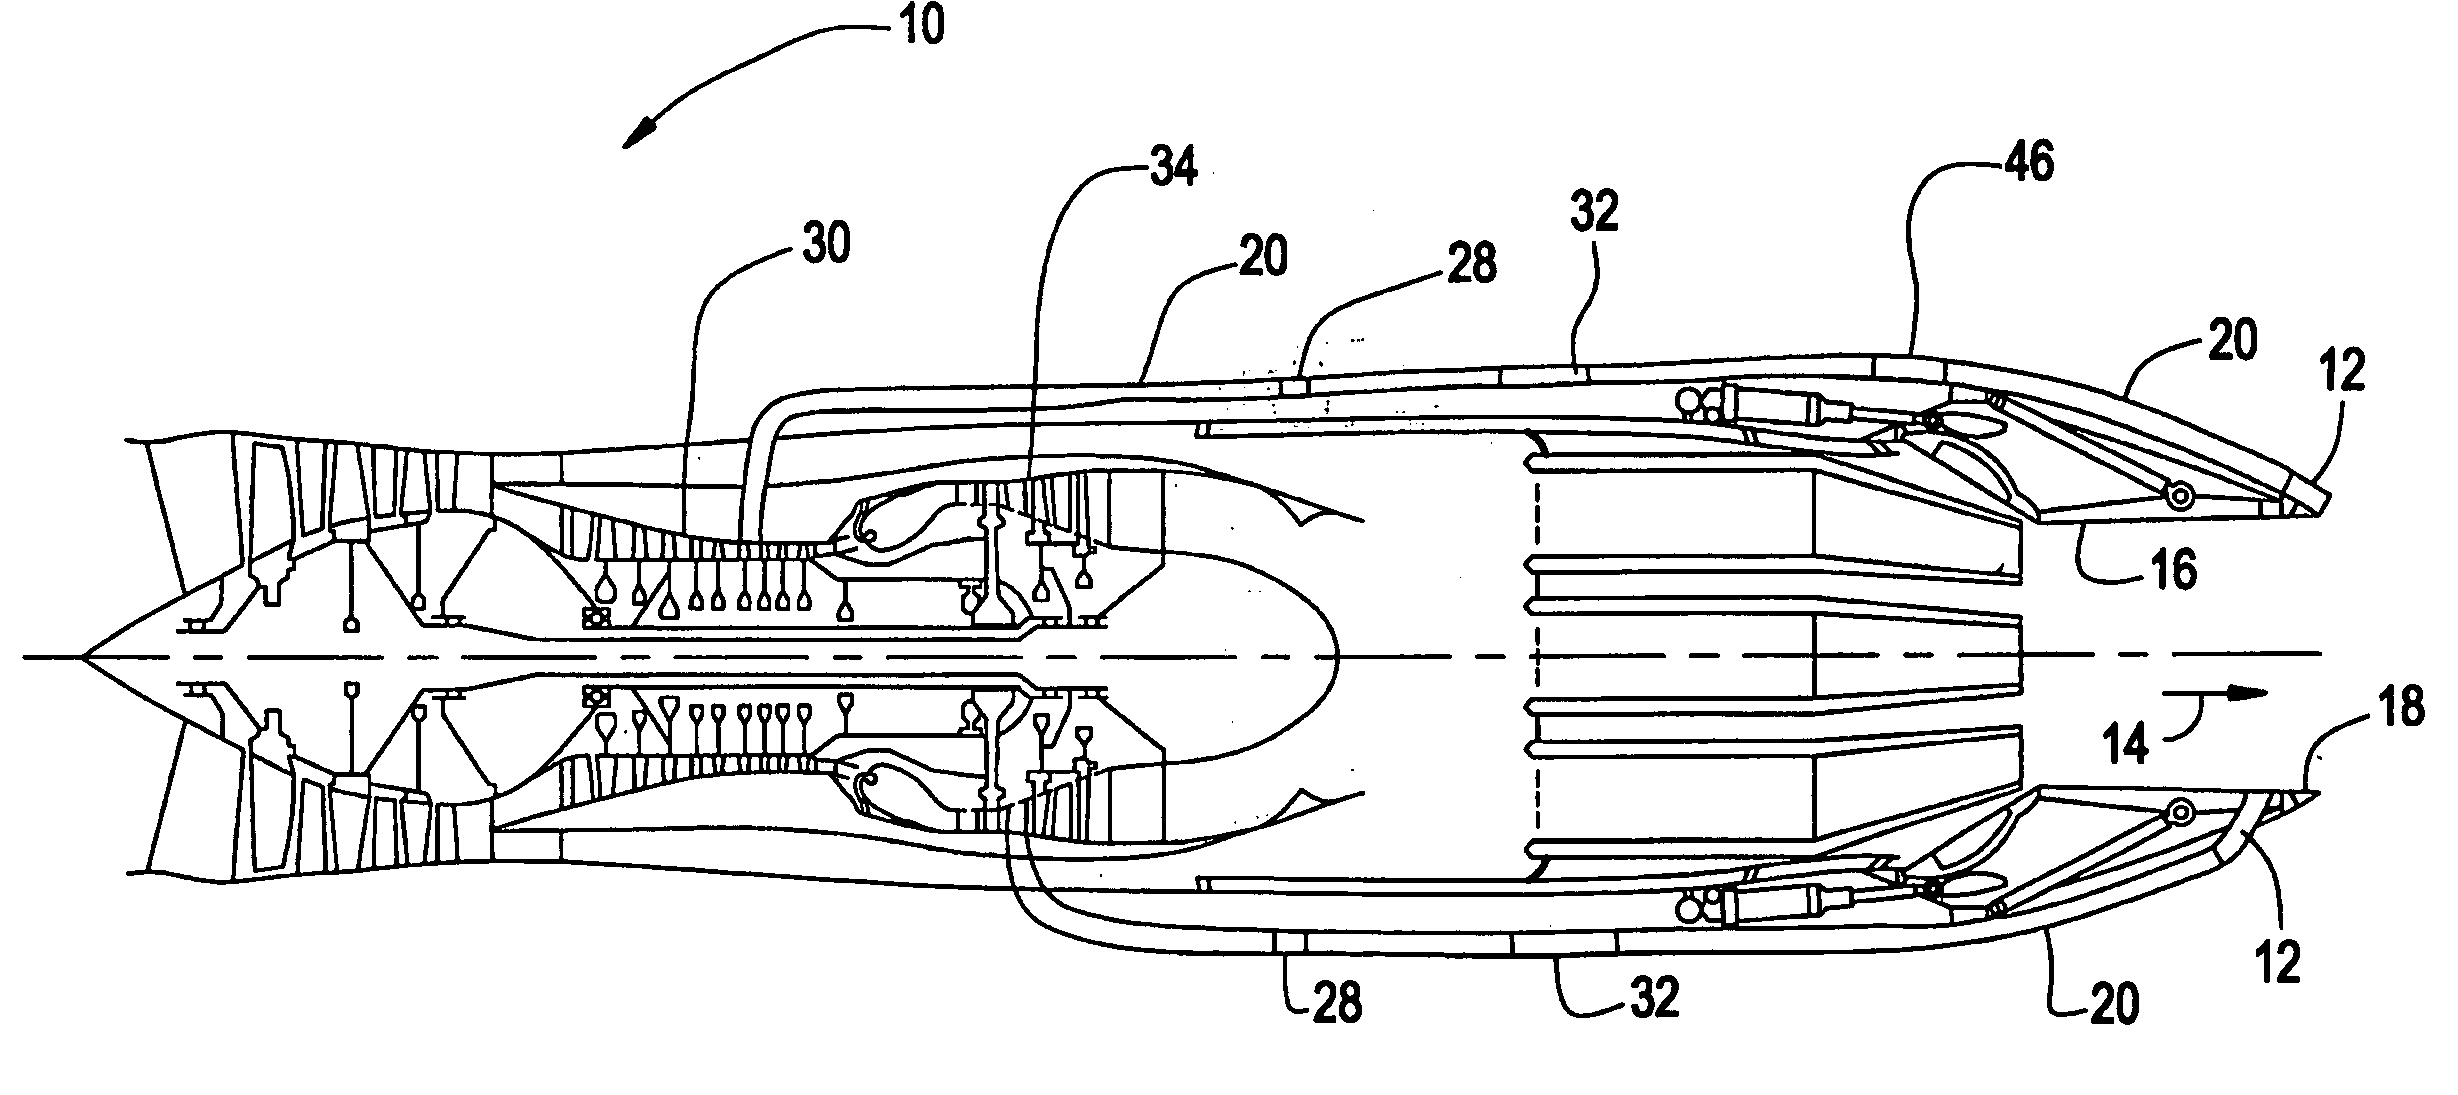 Device for reducing jet engine exhaust noise using oscillating jets